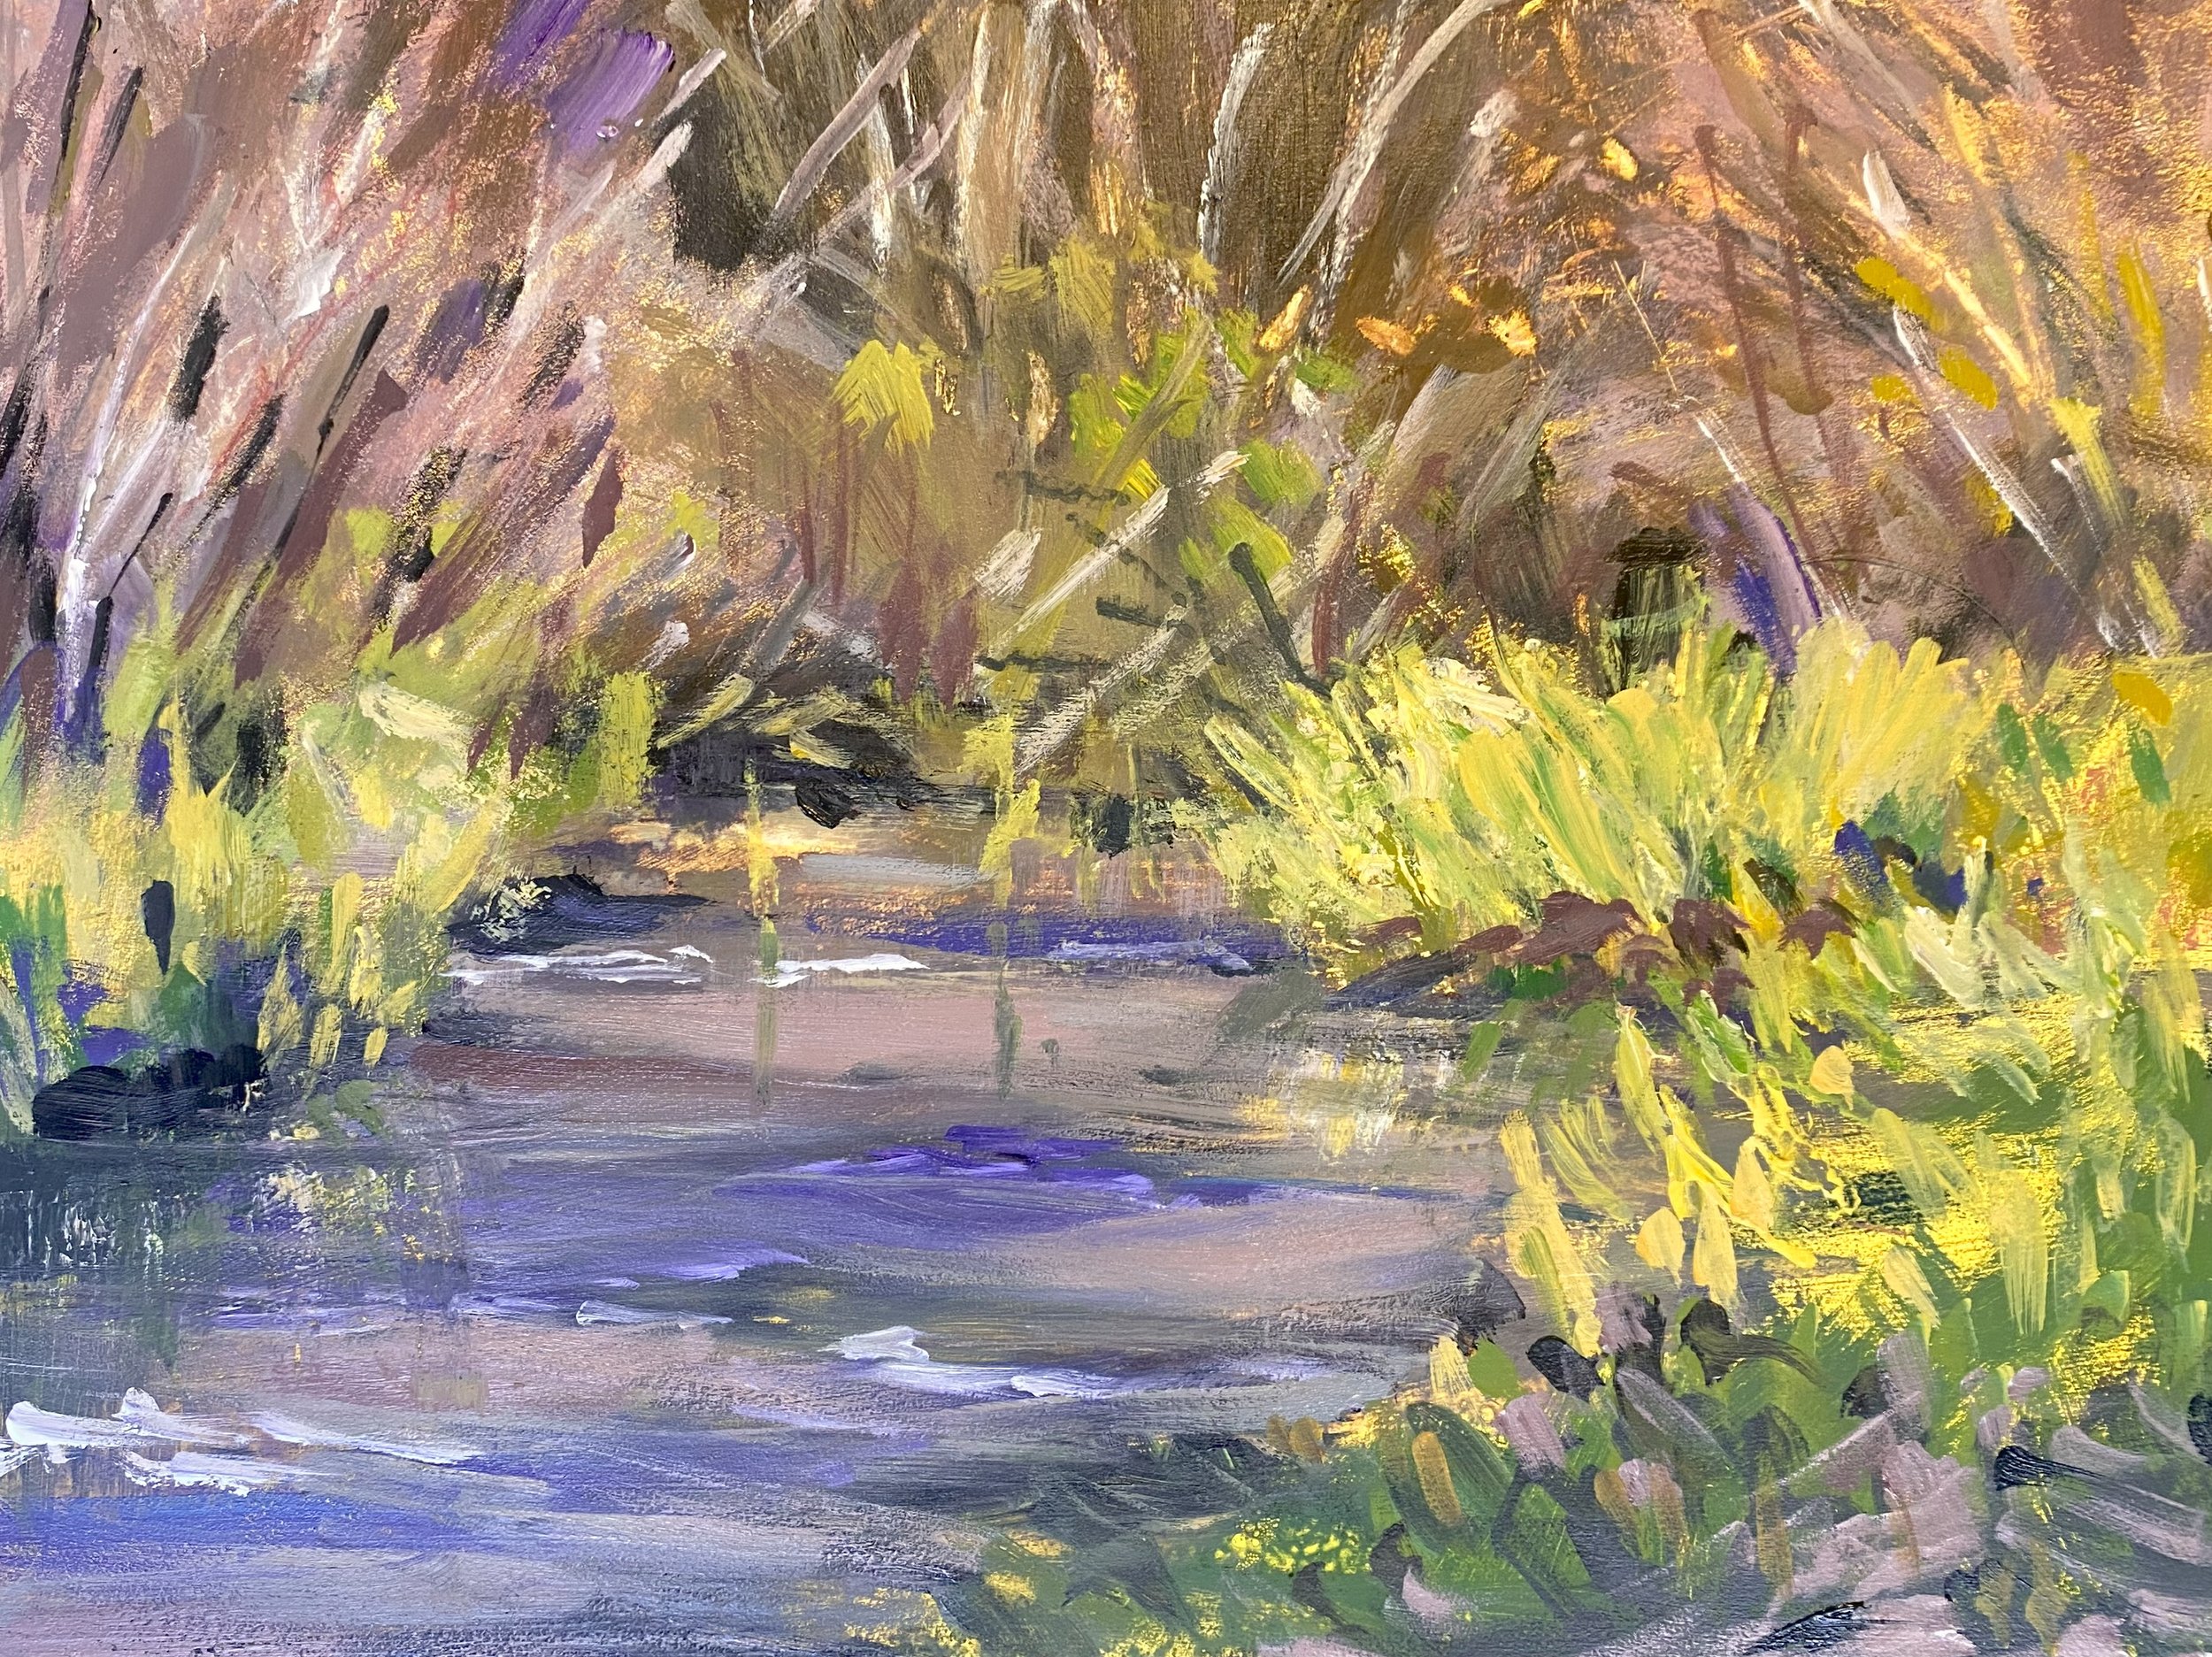 Spring Brook, color study in Violet/Yellow with split, blue/green 8 x 10 on panel, acrylic.